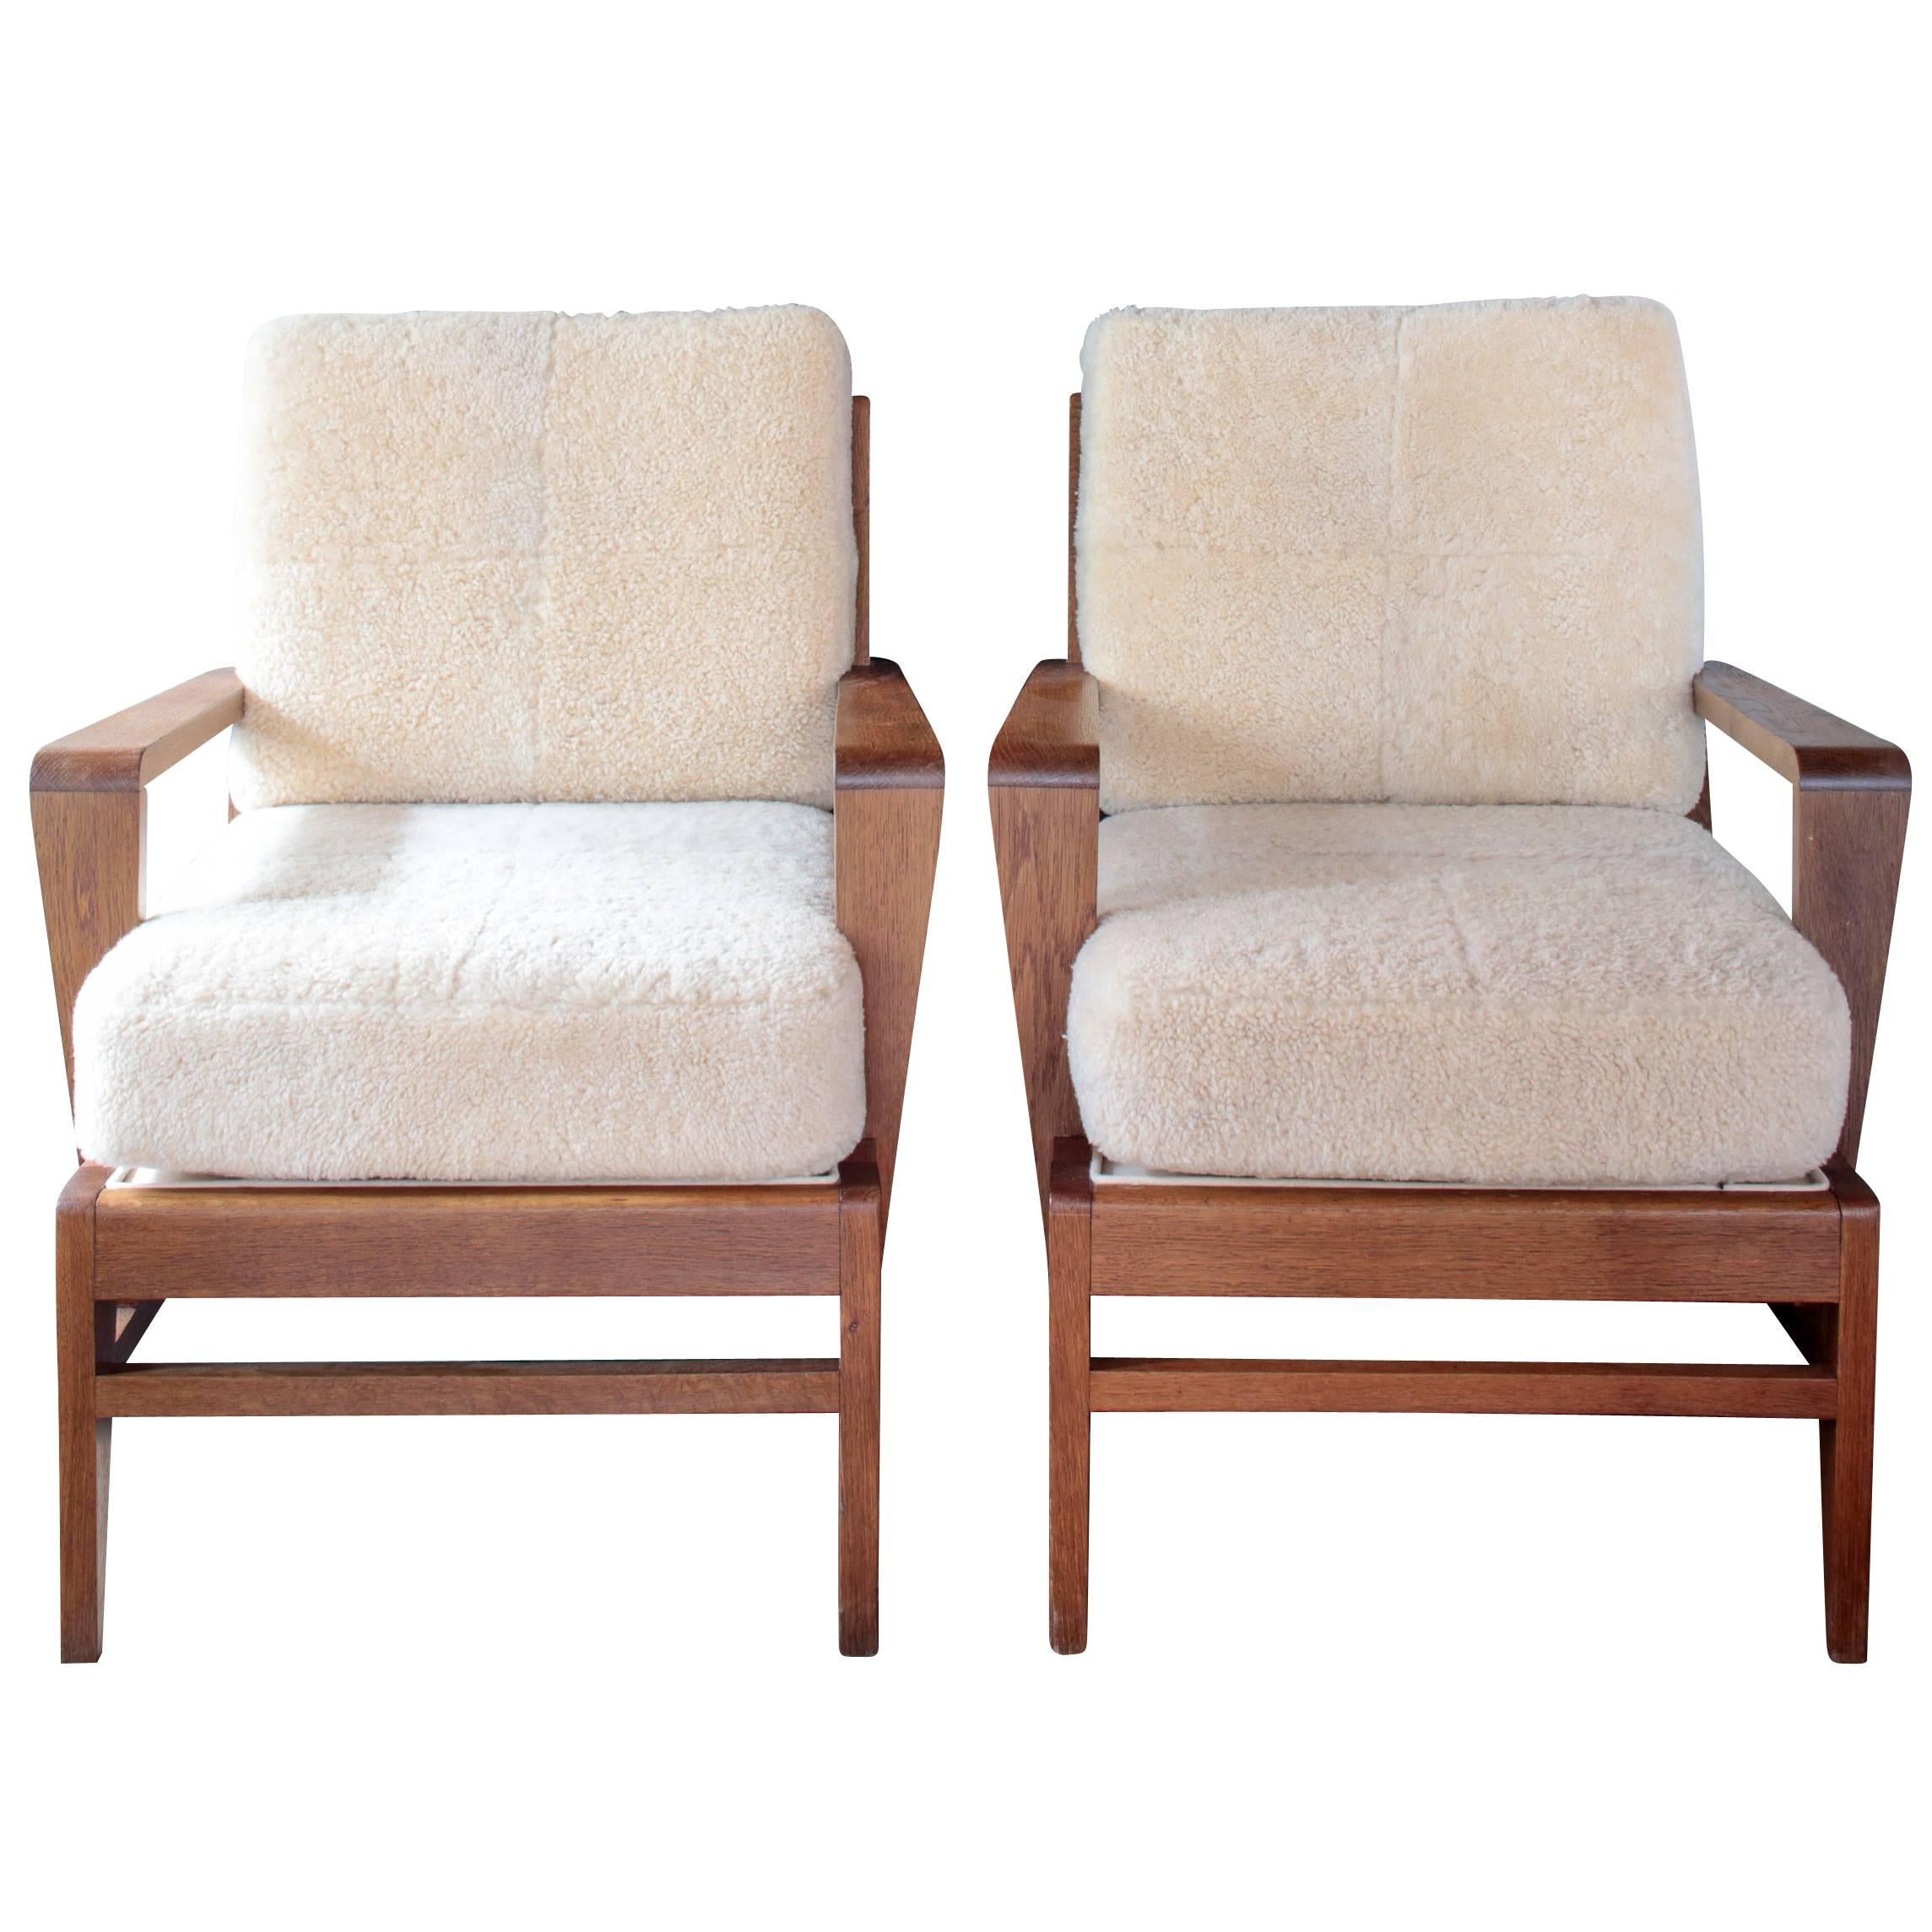 Pair of Midcentury Oak Chairs by Rene Gabriel with Shearling Cushions